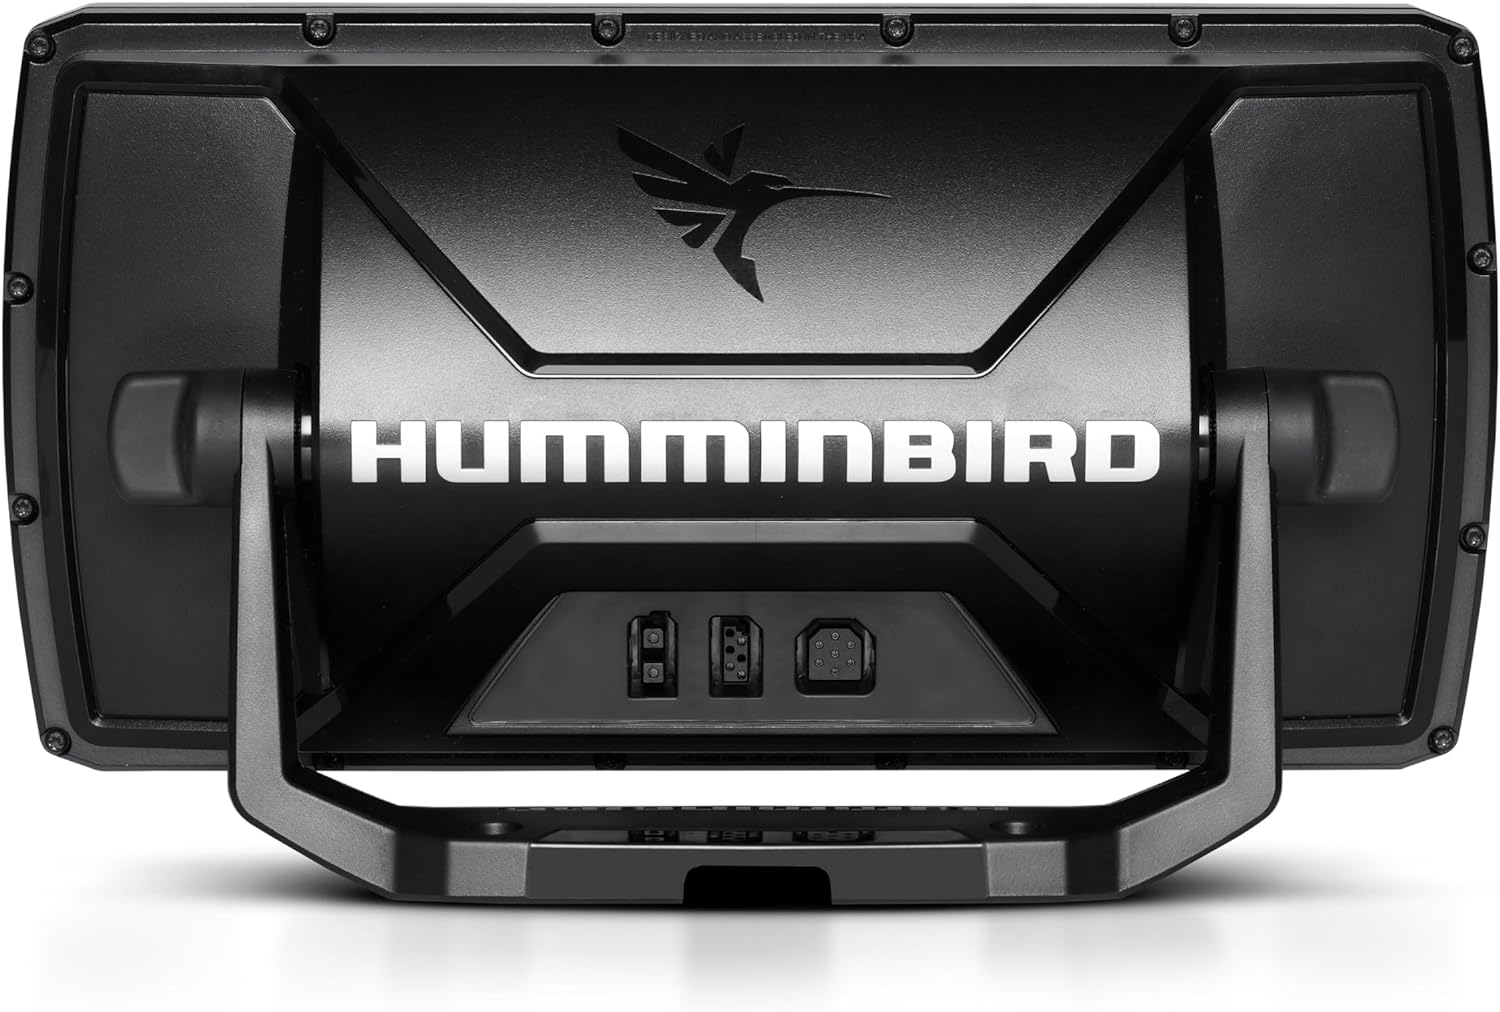 Humminbird 411920-1 Helix 7 SI GPS G4 - Humminbird 411920-1 Helix 7 SI GPS G4 Review